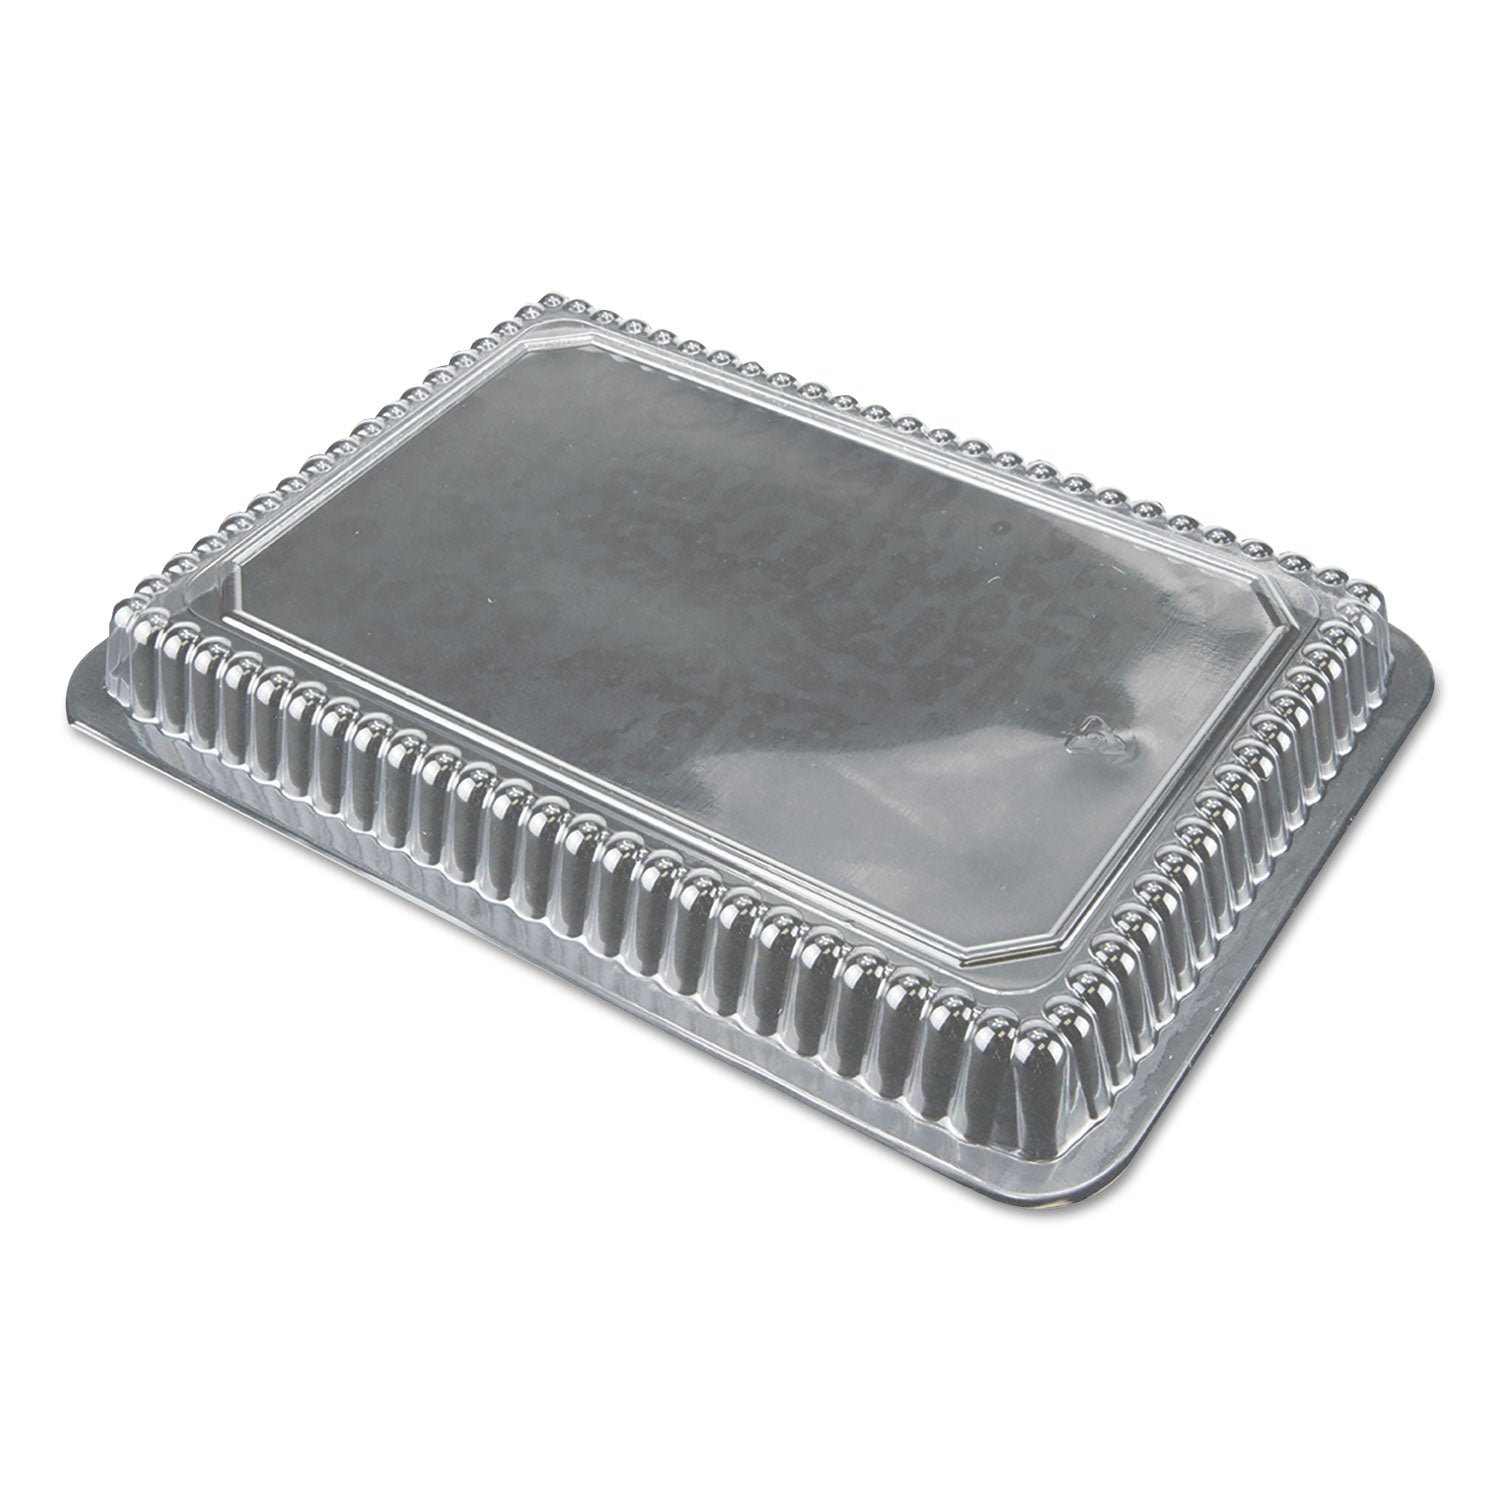 dome-lids-for-15-lb-2-lb-and-225-lb-oblong-containers-794-x-544-clear-plastic-500-carton_dpkp250500 - 1